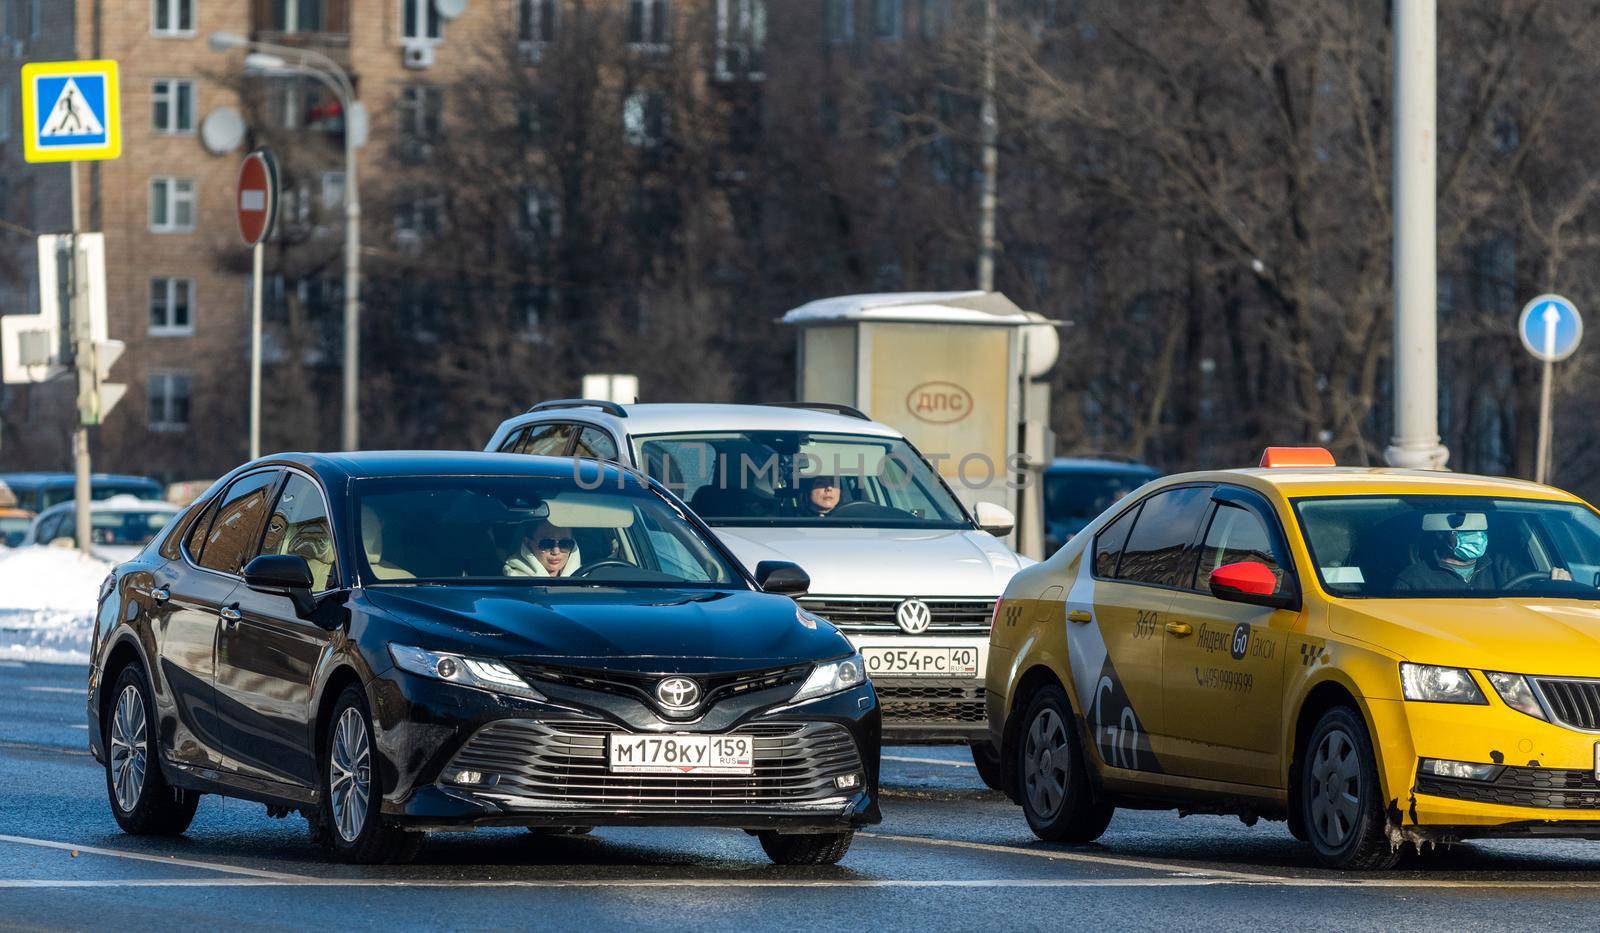 February 7, 2021. Moscow, Russia. Car traffic on Leninsky Prospekt in Moscow on a frosty winter day.